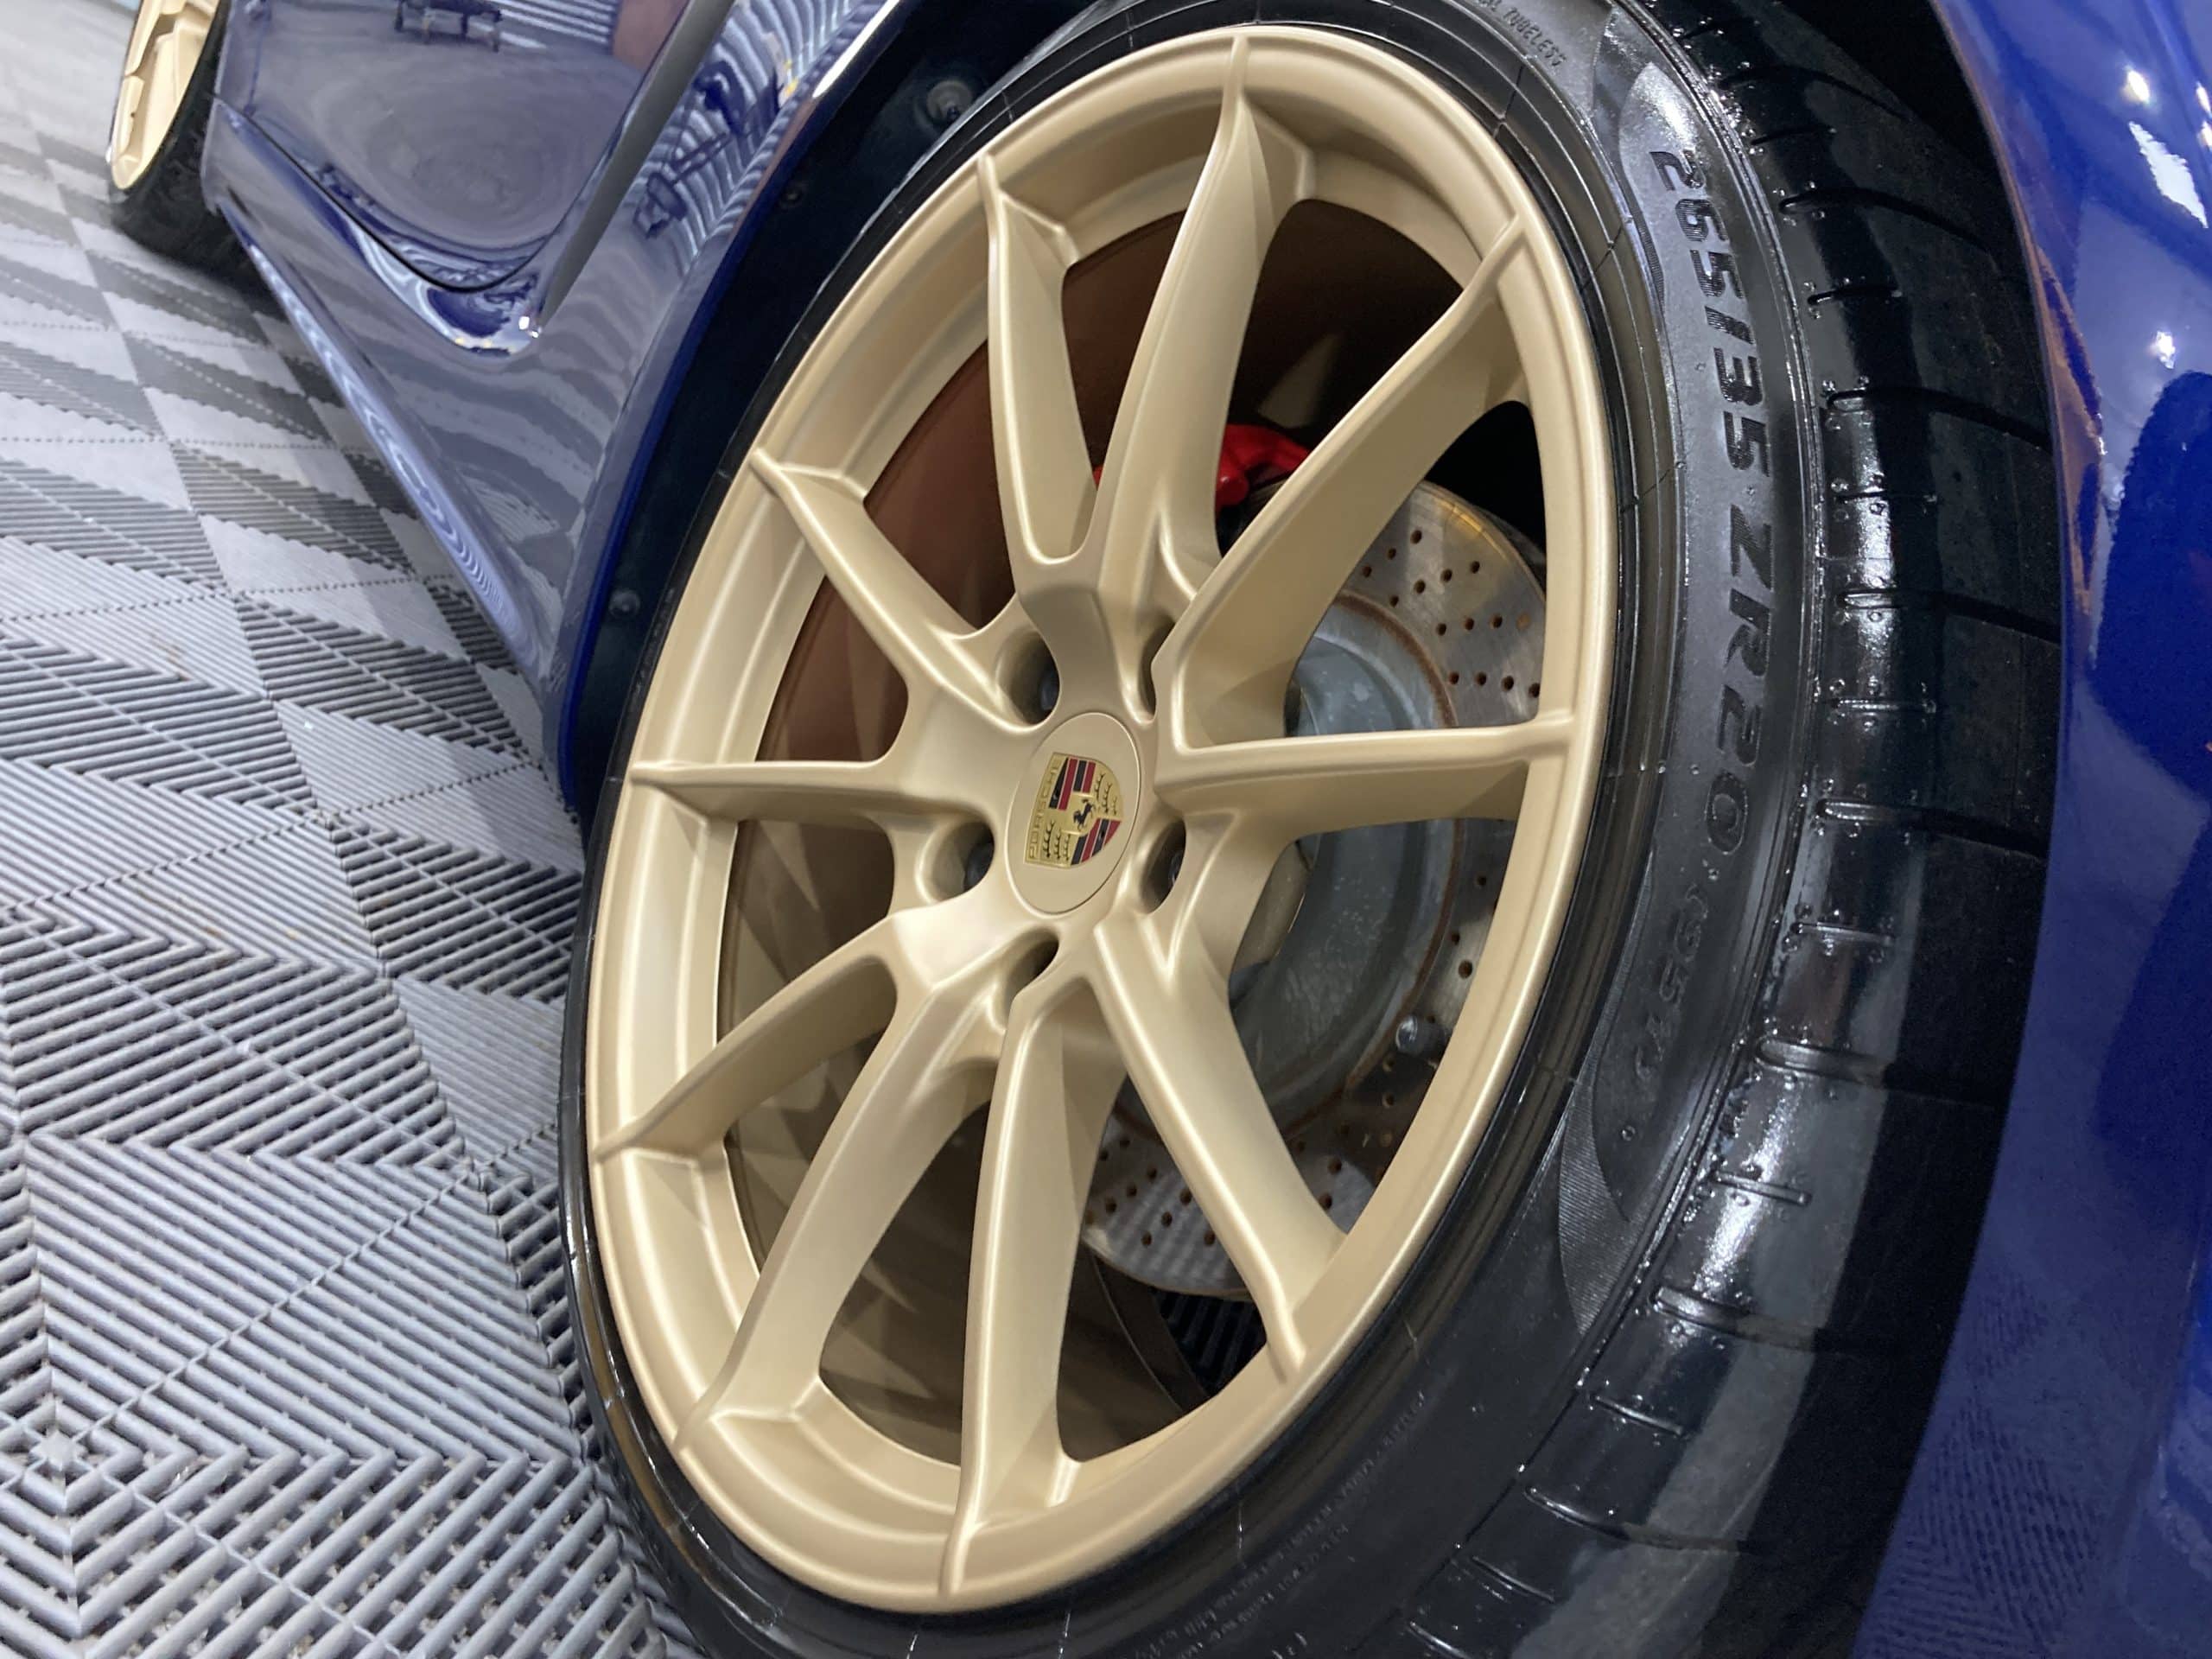 A close-up of a gold alloy wheel on a blue car, displaying the tire size 265/35 ZR20 and a visible disc brake with a Porsche logo on the hub. The car detailing highlights the shine, enhanced by paint protection film for added durability.